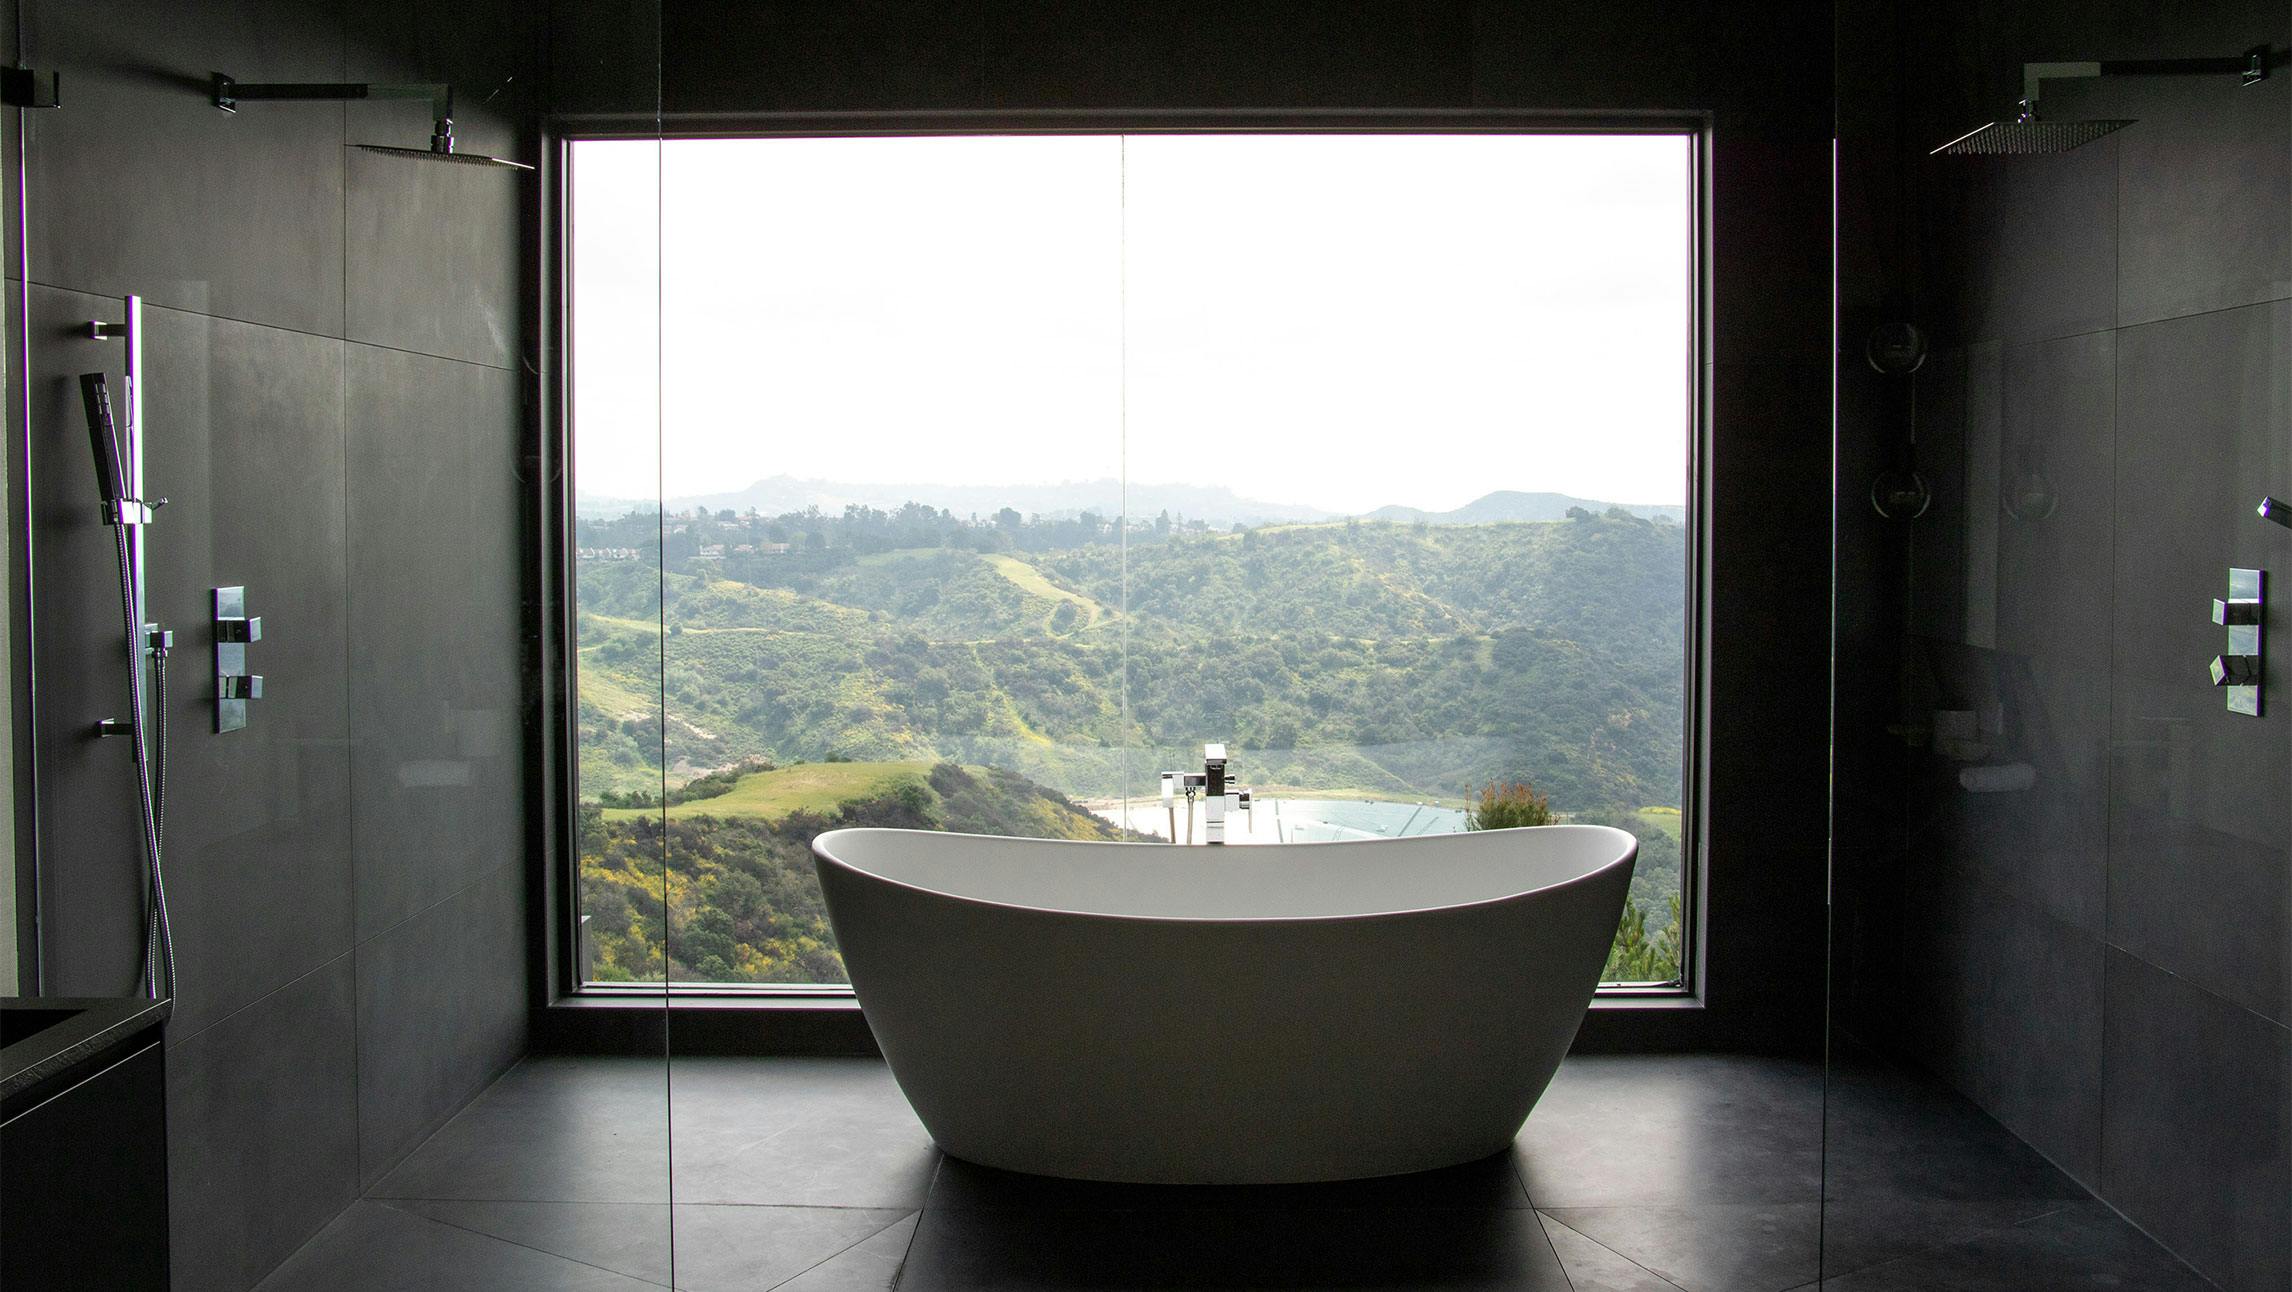 A photograph of a bathtub with a view. The white tub is centered in a dark slate room with chrome faucets and one wall that is all glass and overlook the green hills outside.